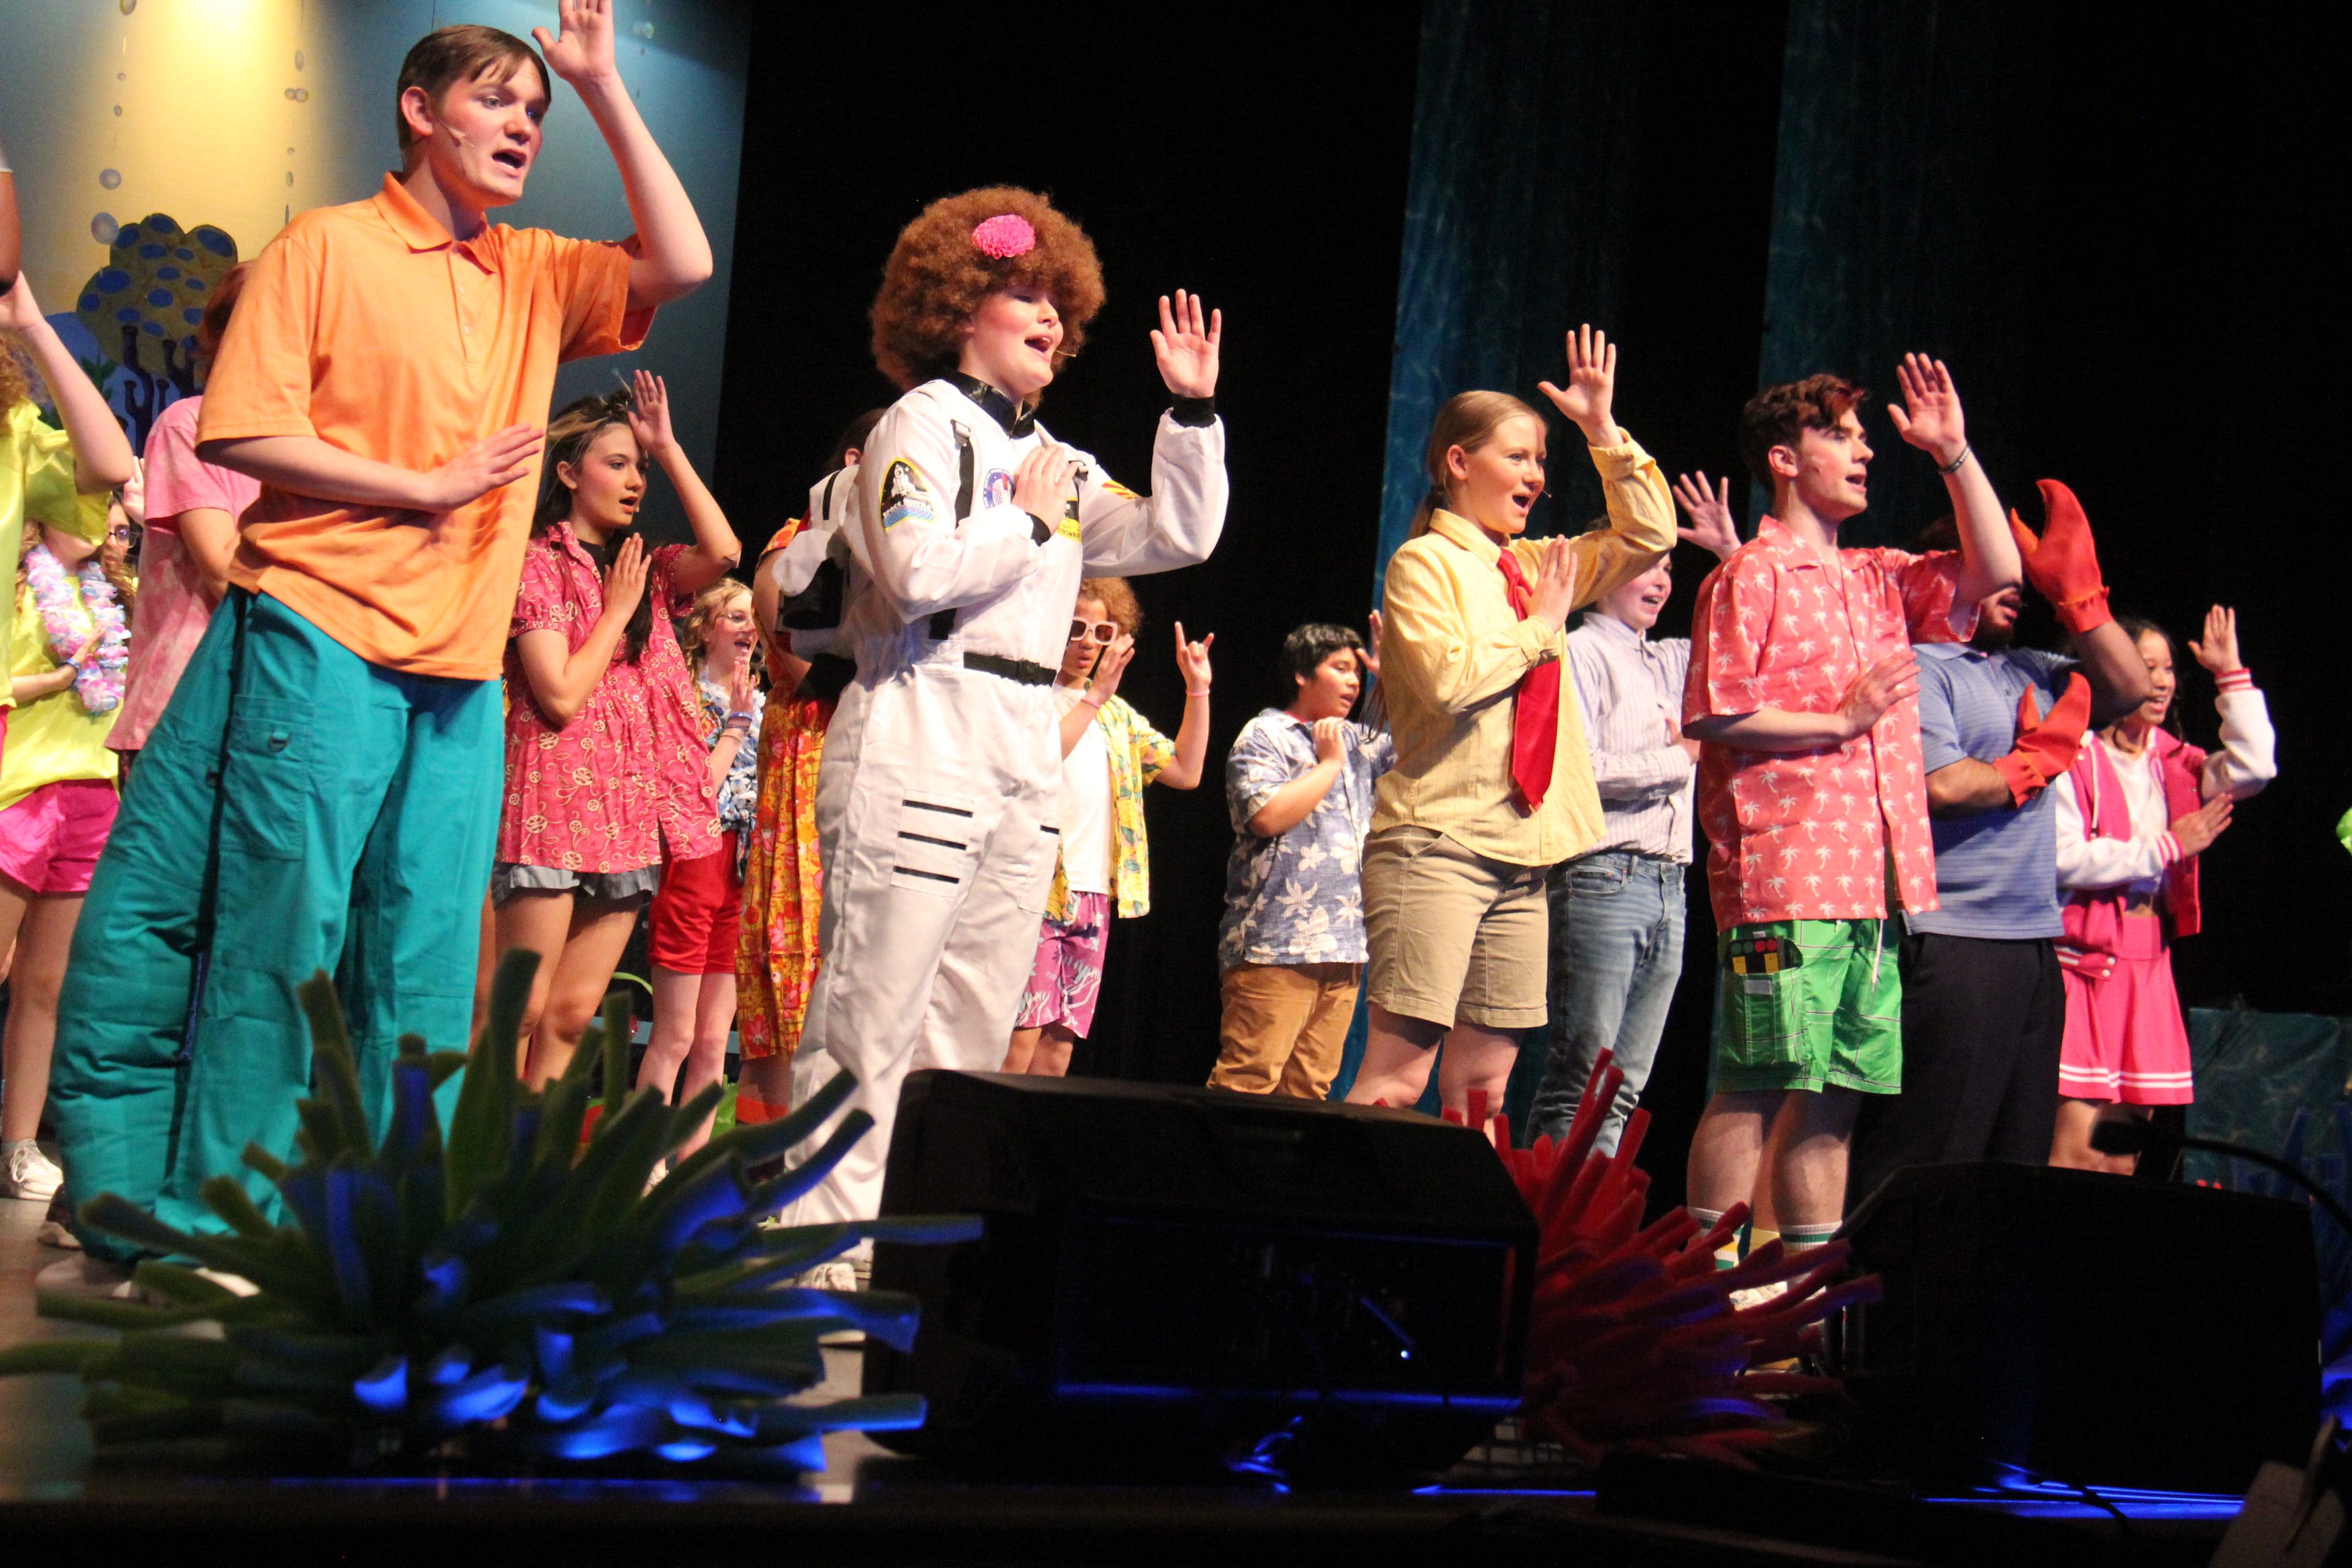 Perry students receive Iowa High School Musical Theater Awards for ‘SpongeBob’ performances